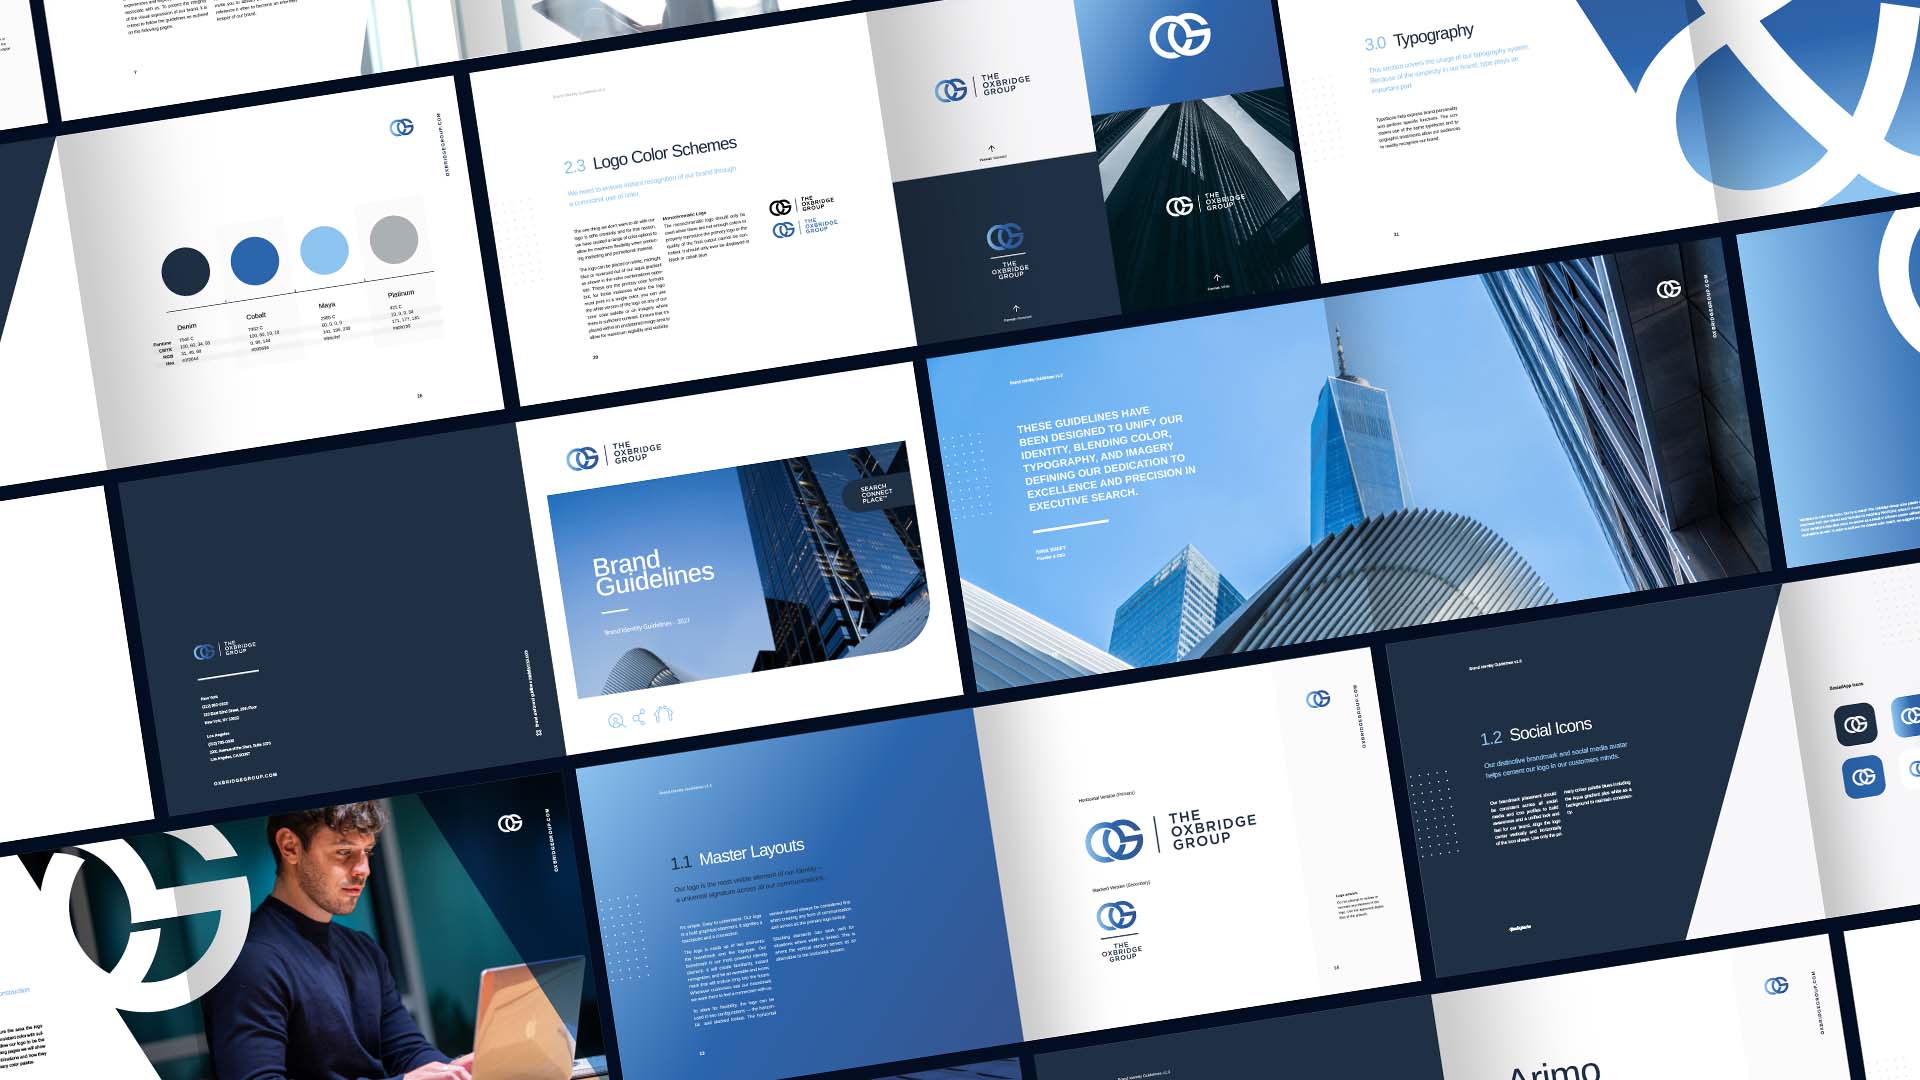 The Oxbridge Group - Executive Search brand guidelines montage